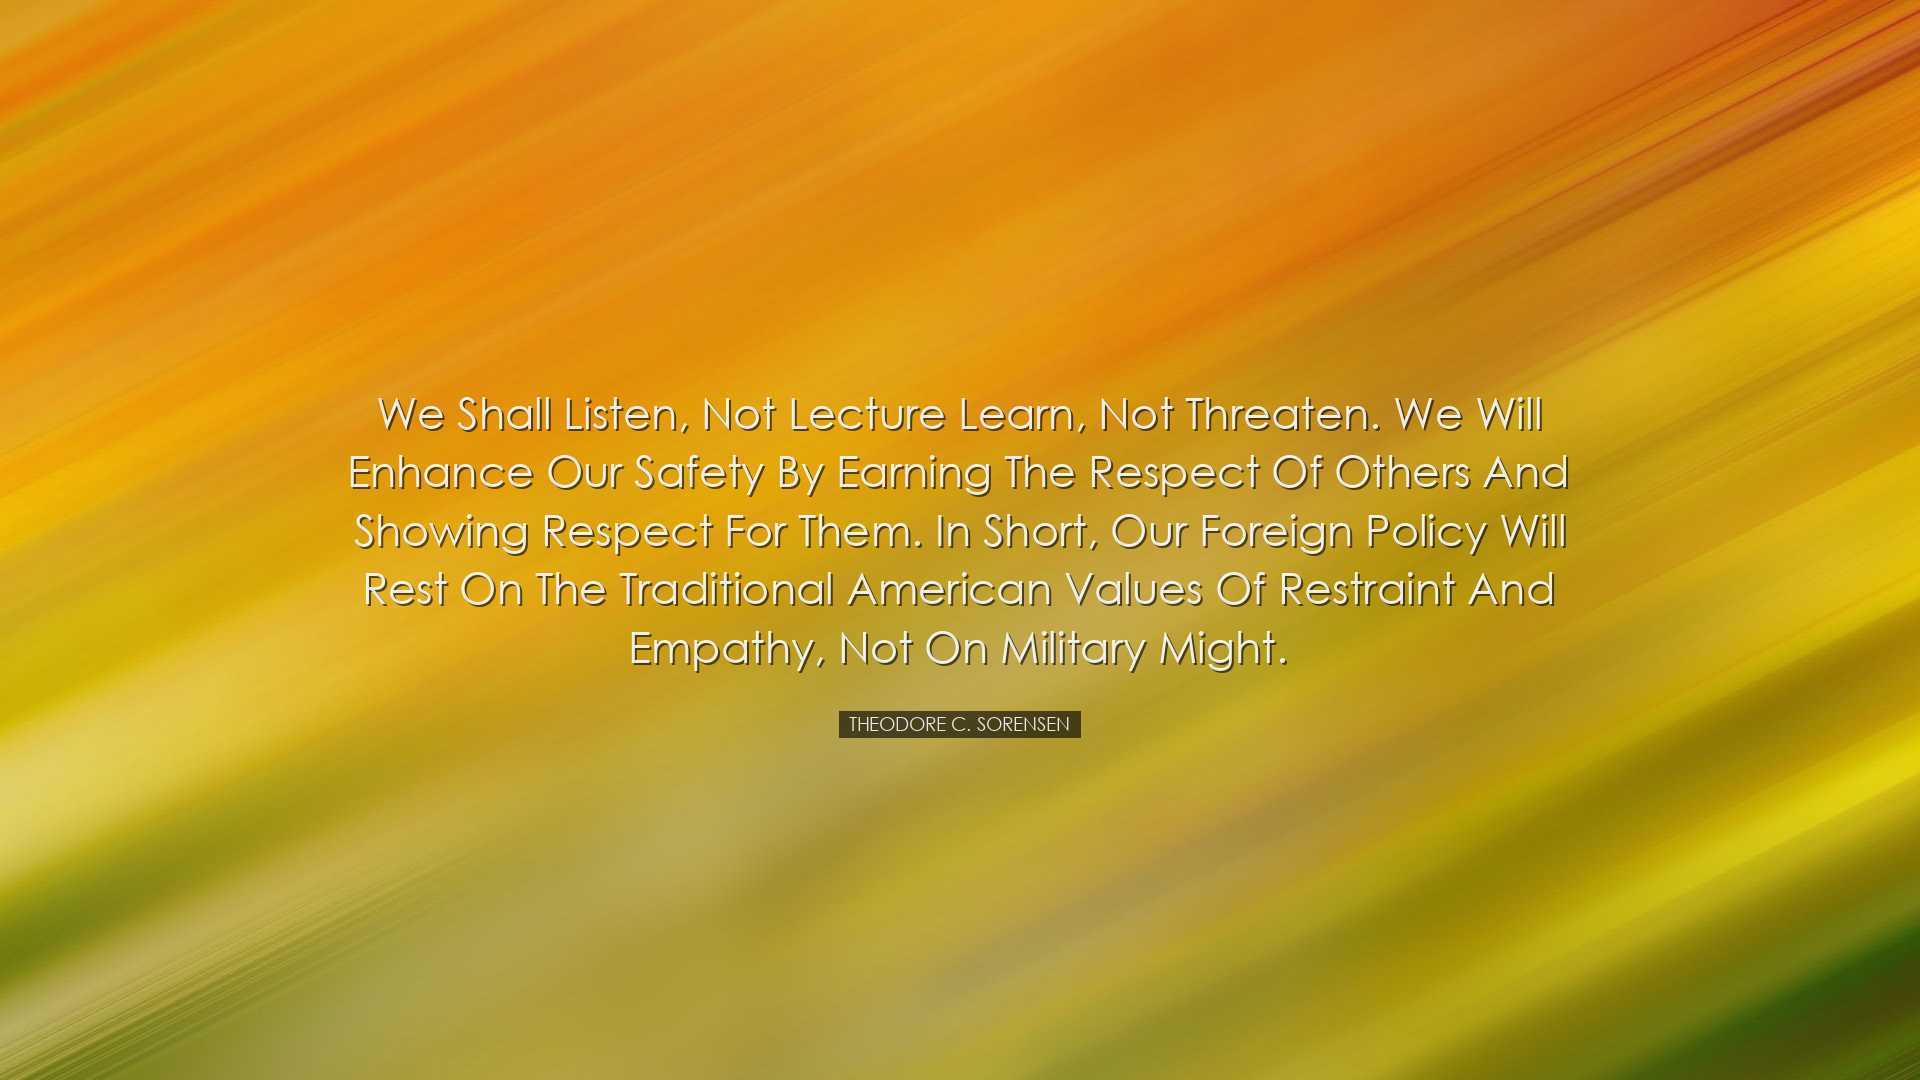 We shall listen, not lecture learn, not threaten. We will enhance